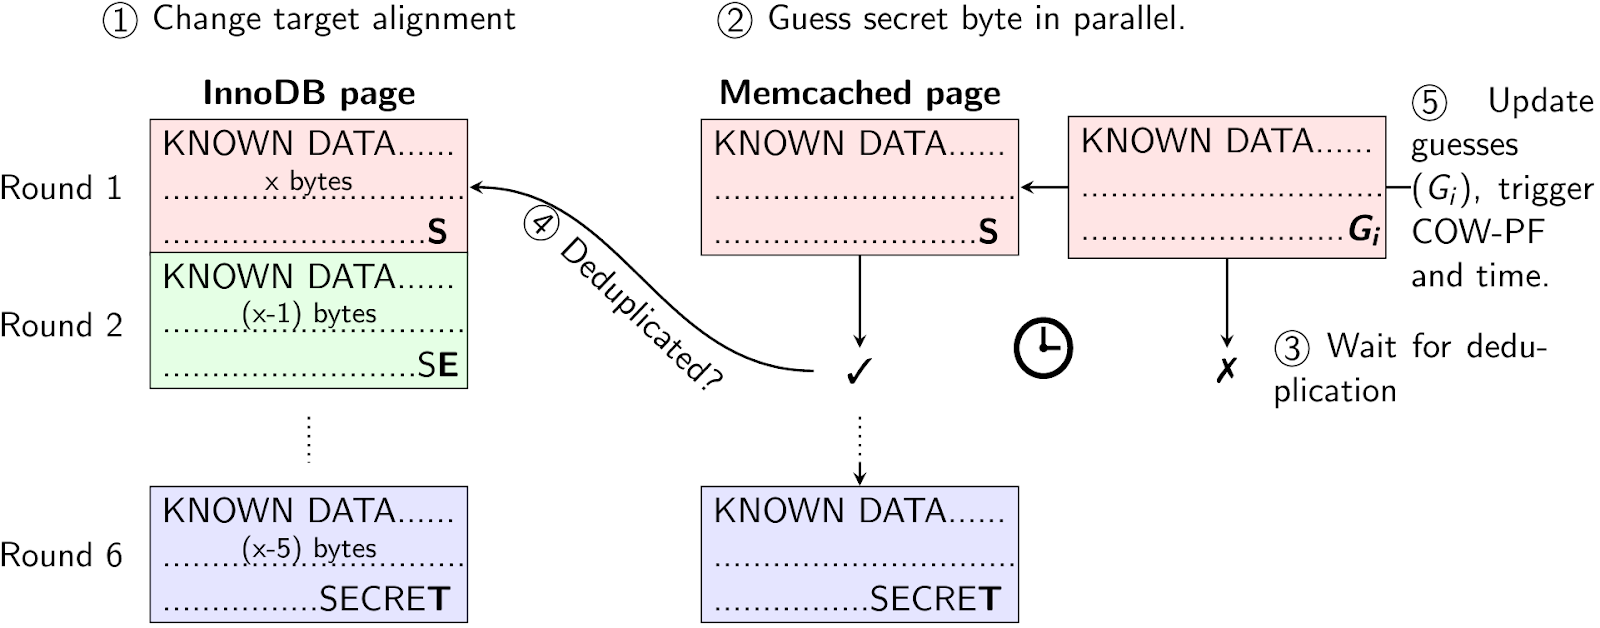 High-level idea of the InnoDB Reorganization attack.
By exploiting the reorganization of data in InnoDB the attacker can leak secret database data byte-by-byte.